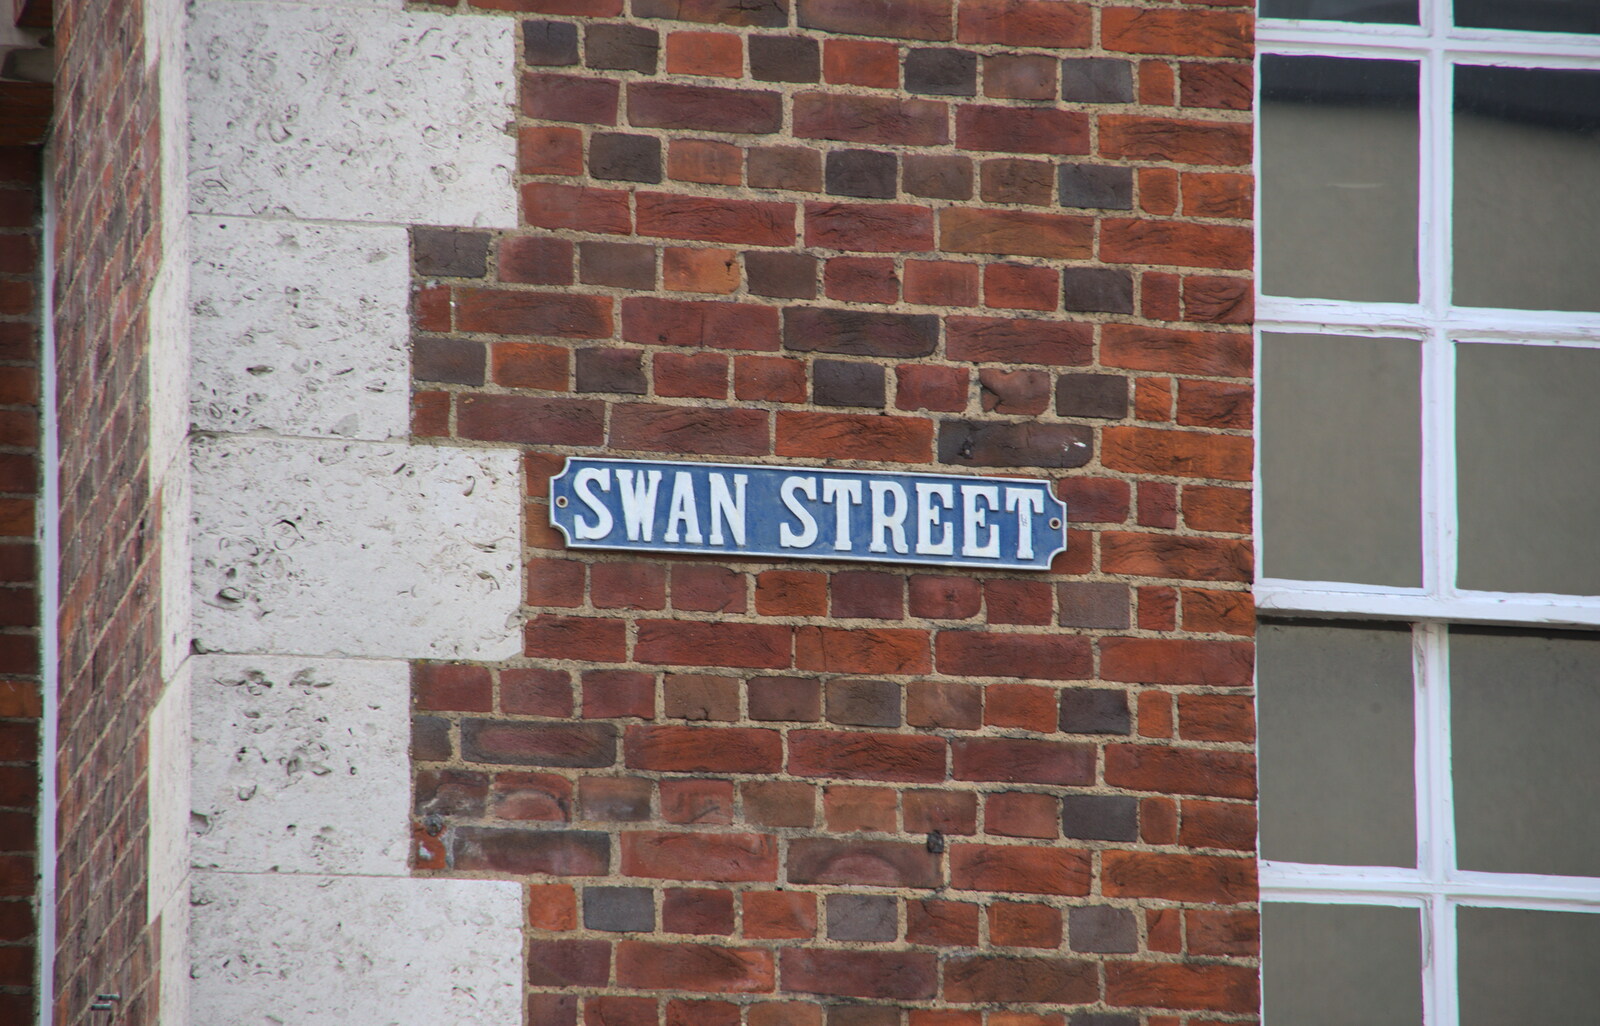 Warwick has a nice line in old street signs from A Day at Warwick Castle, Warwickshire - 8th September 2018